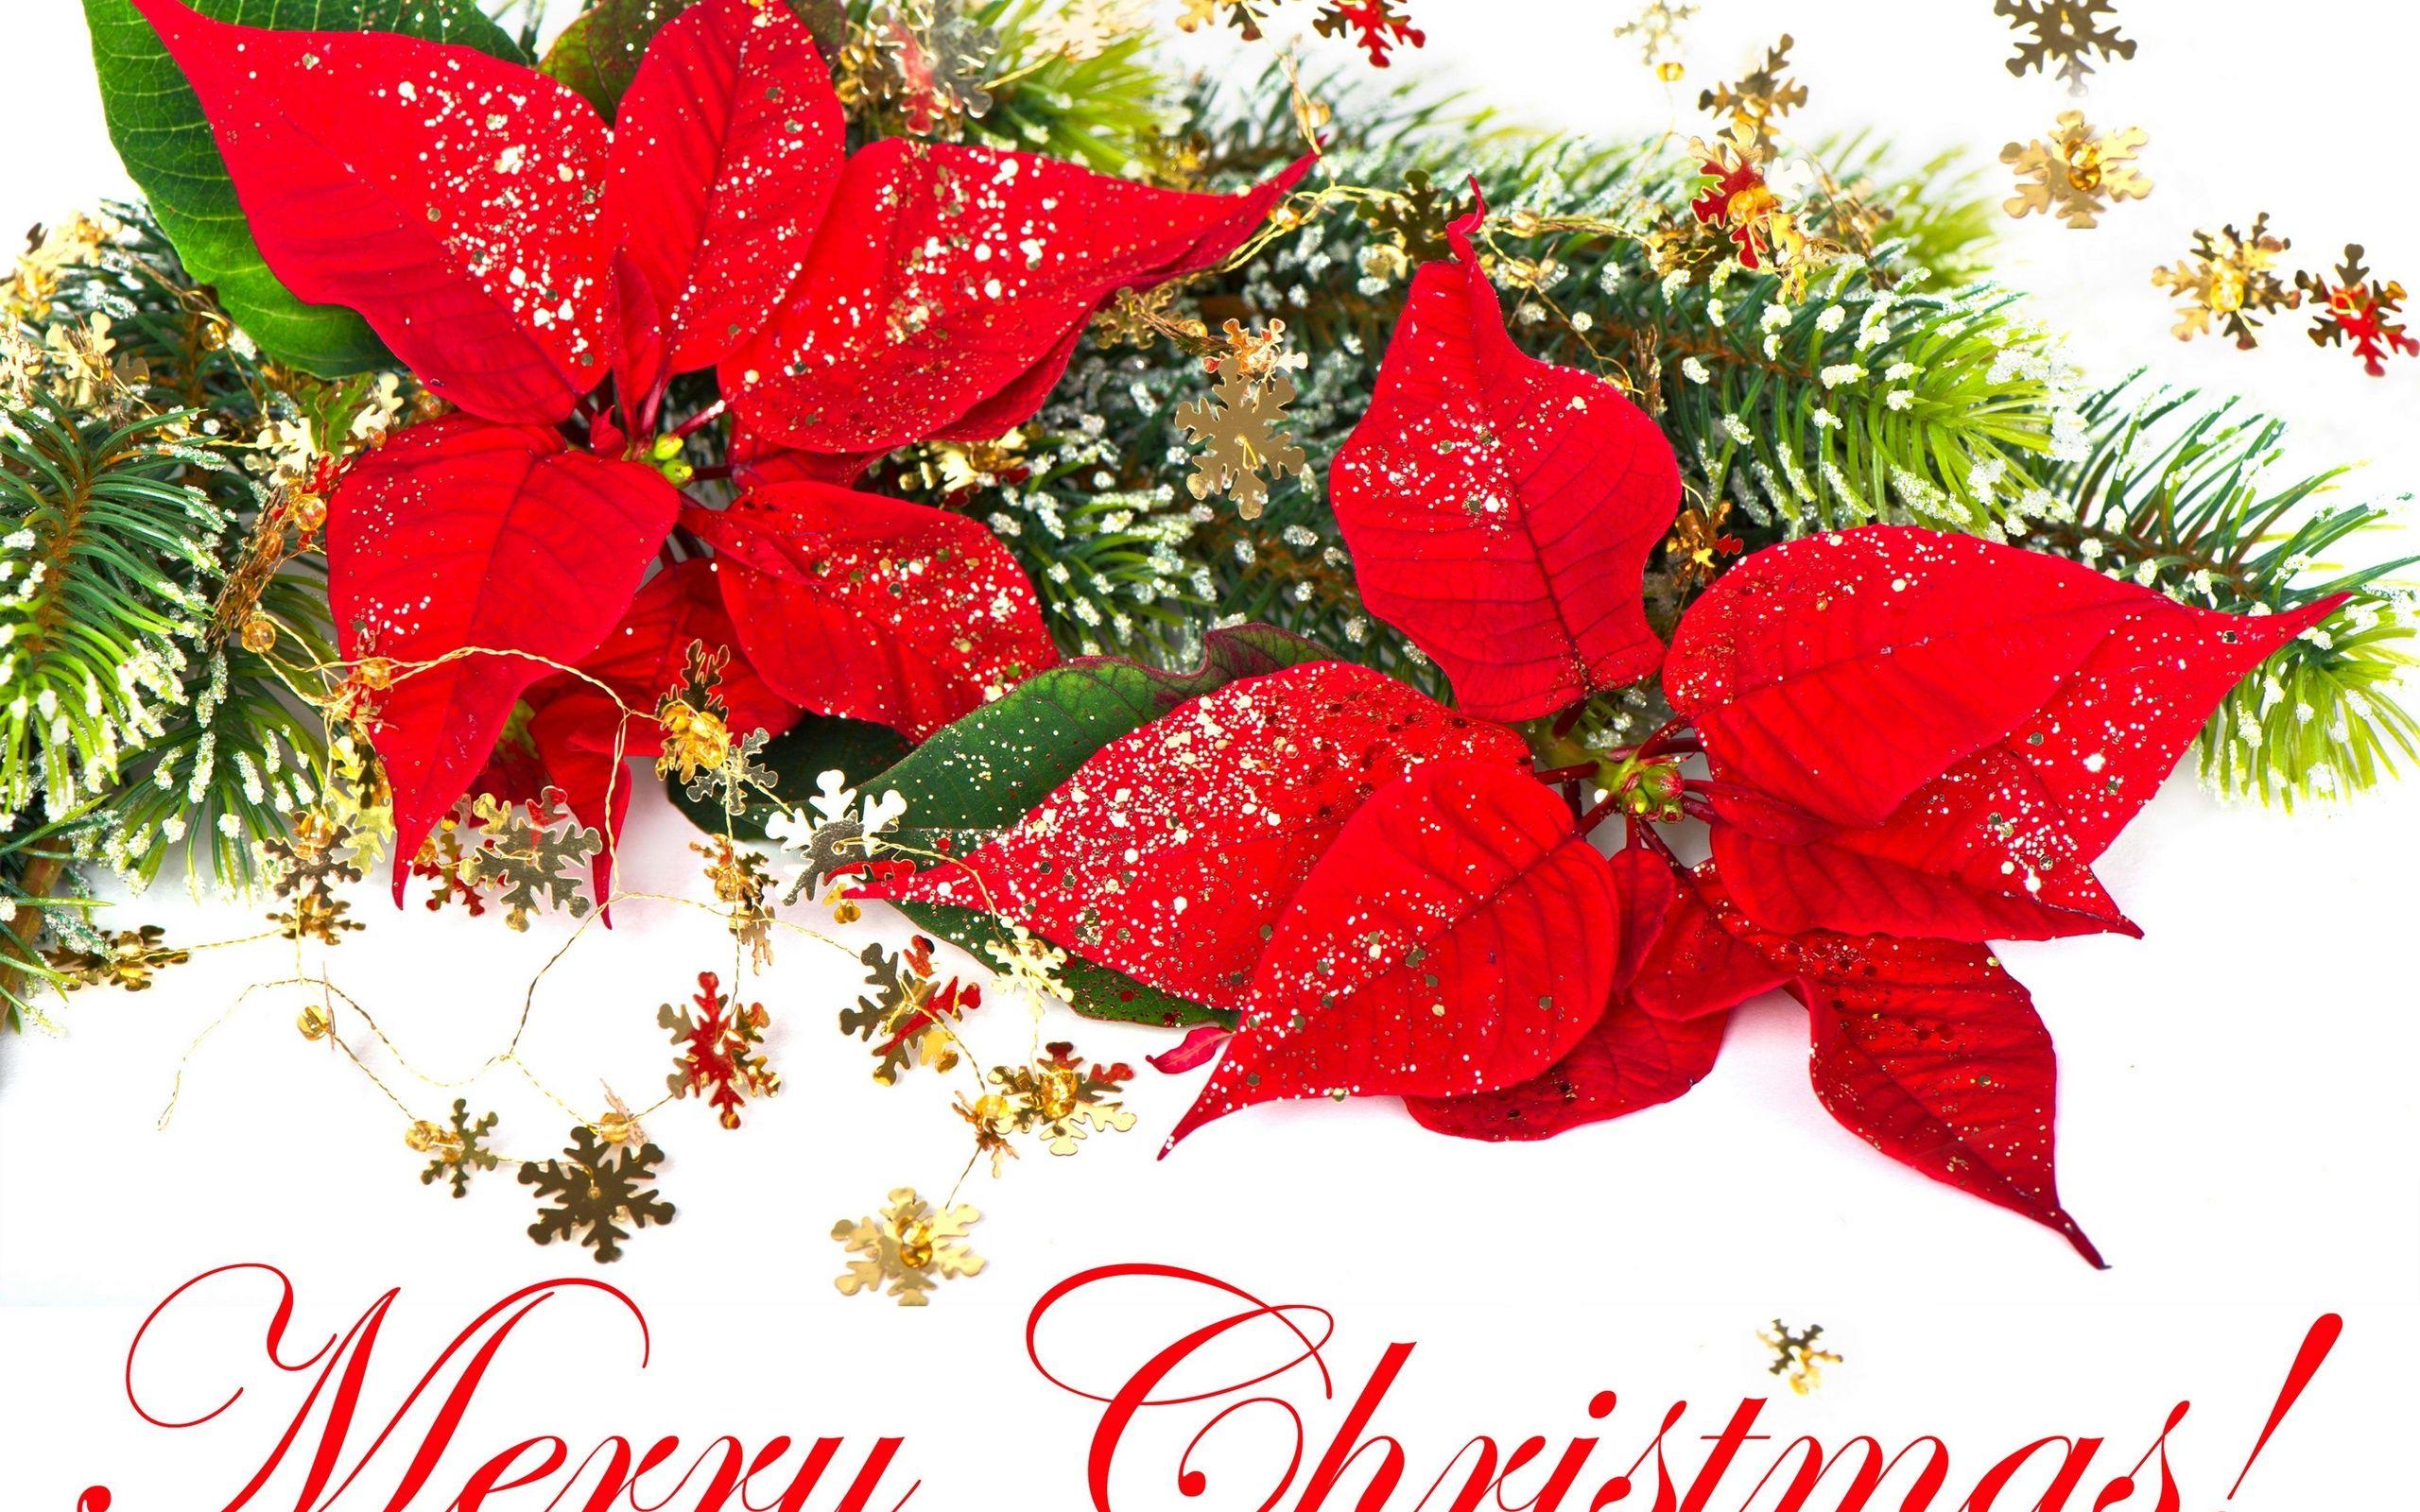 Beautiful Christmas Flowers Images : Christmas flowers cards do it best ...